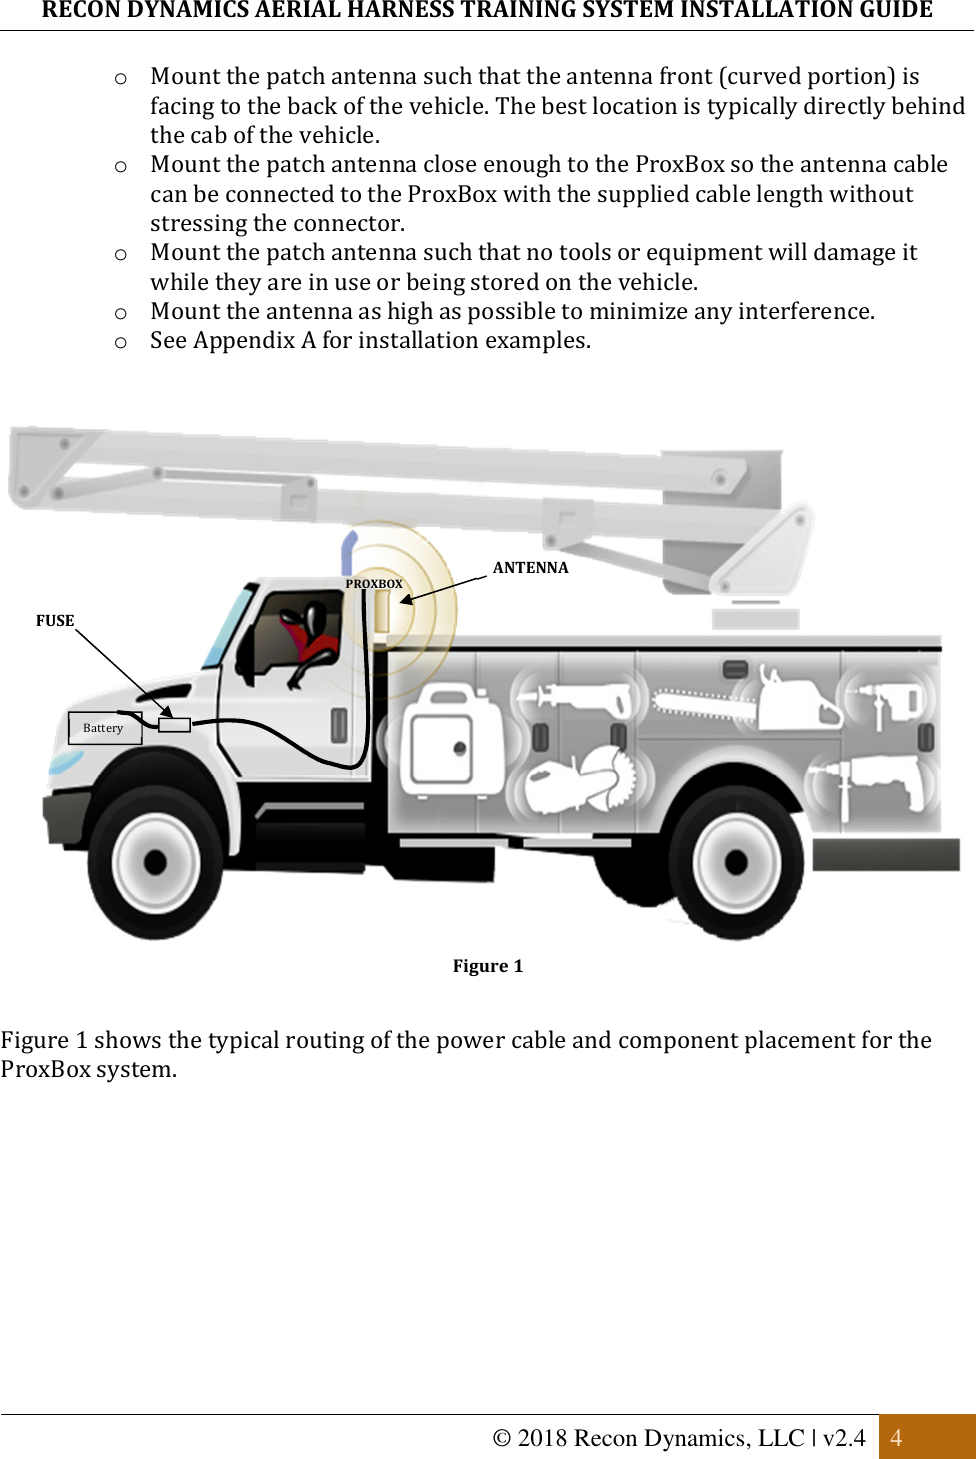 RECON DYNAMICS AERIAL HARNESS TRAINING SYSTEM INSTALLATION GUIDE   © 2018 Recon Dynamics, LLC | v2.4  4  o Mount the patch antenna such that the antenna front (curved portion) is facing to the back of the vehicle. The best location is typically directly behind the cab of the vehicle. o Mount the patch antenna close enough to the ProxBox so the antenna cable can be connected to the ProxBox with the supplied cable length without stressing the connector. o Mount the patch antenna such that no tools or equipment will damage it while they are in use or being stored on the vehicle. o Mount the antenna as high as possible to minimize any interference. o See Appendix A for installation examples.    Figure 1  Figure 1 shows the typical routing of the power cable and component placement for the ProxBox system.      ANTENNA PROXBOX Battery FUSE 